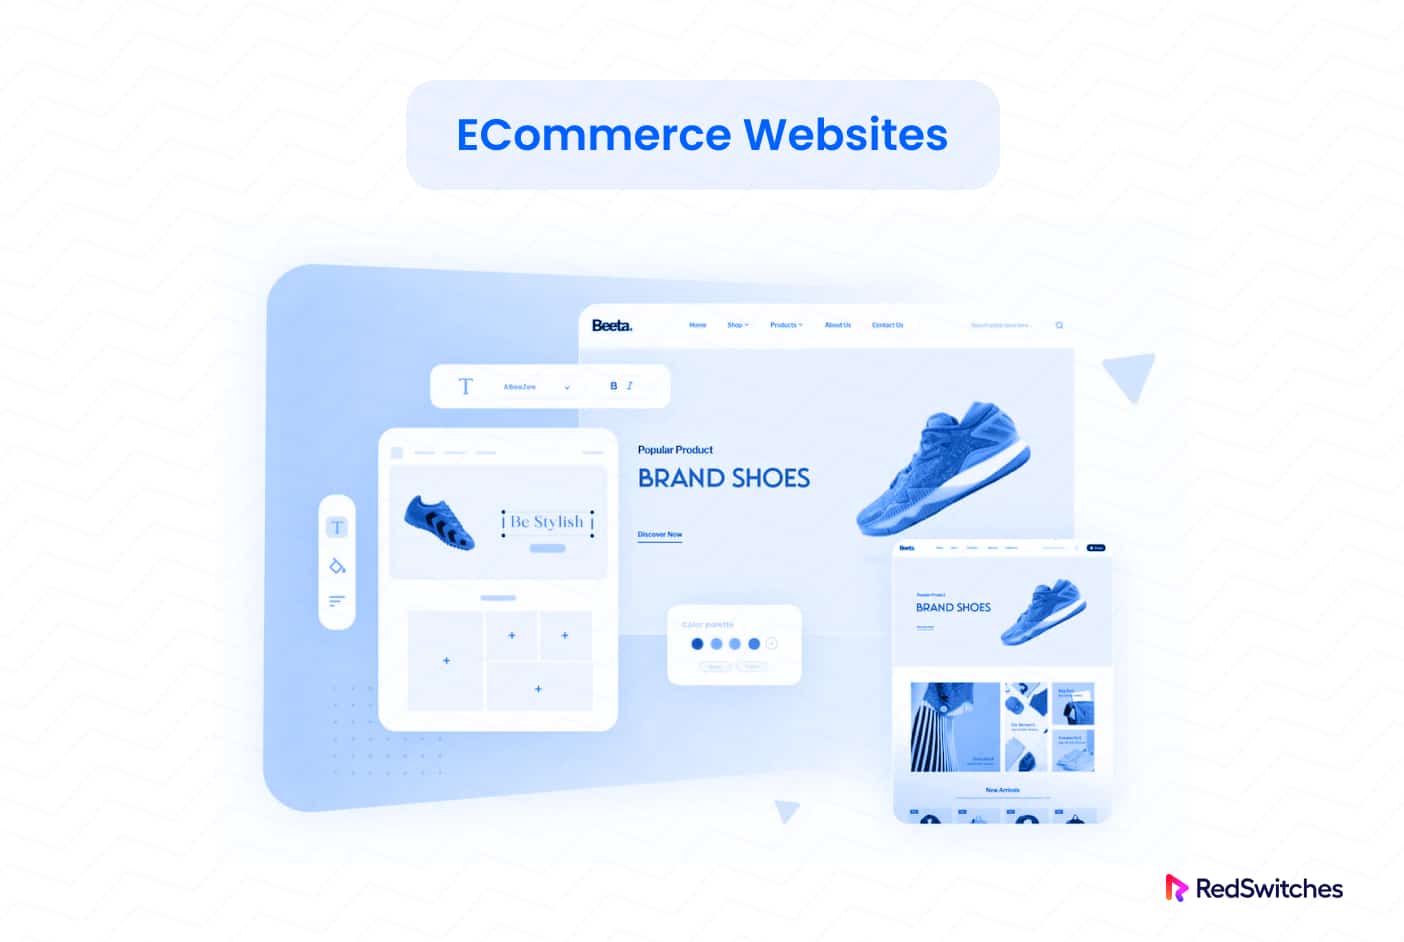 Ecommerce website is a examples of databases